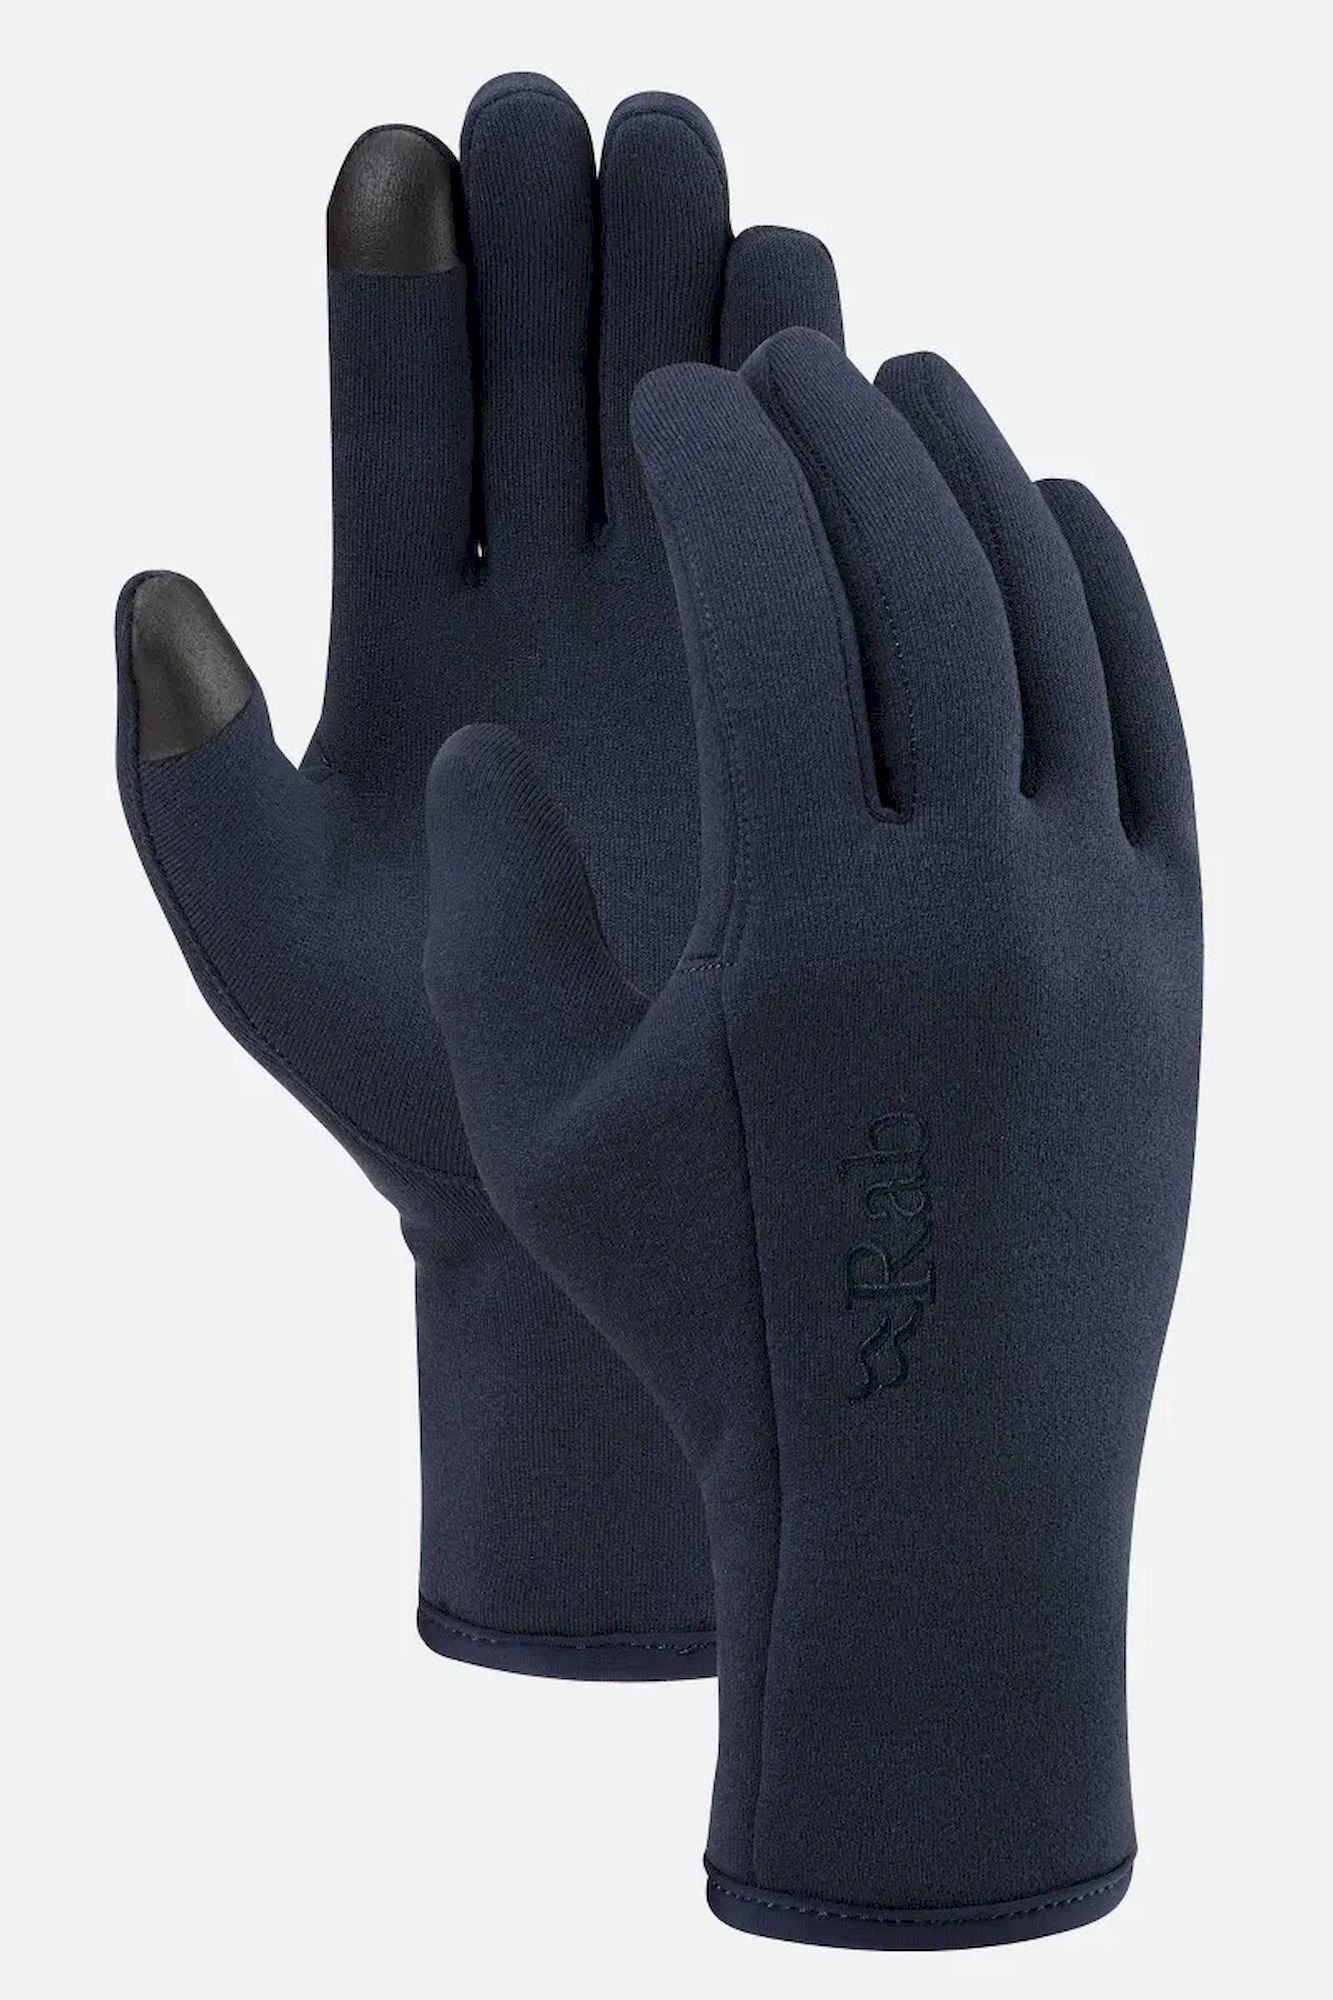 Rab Power Stretch Contact Gloves - Guanti - Uomo | Hardloop